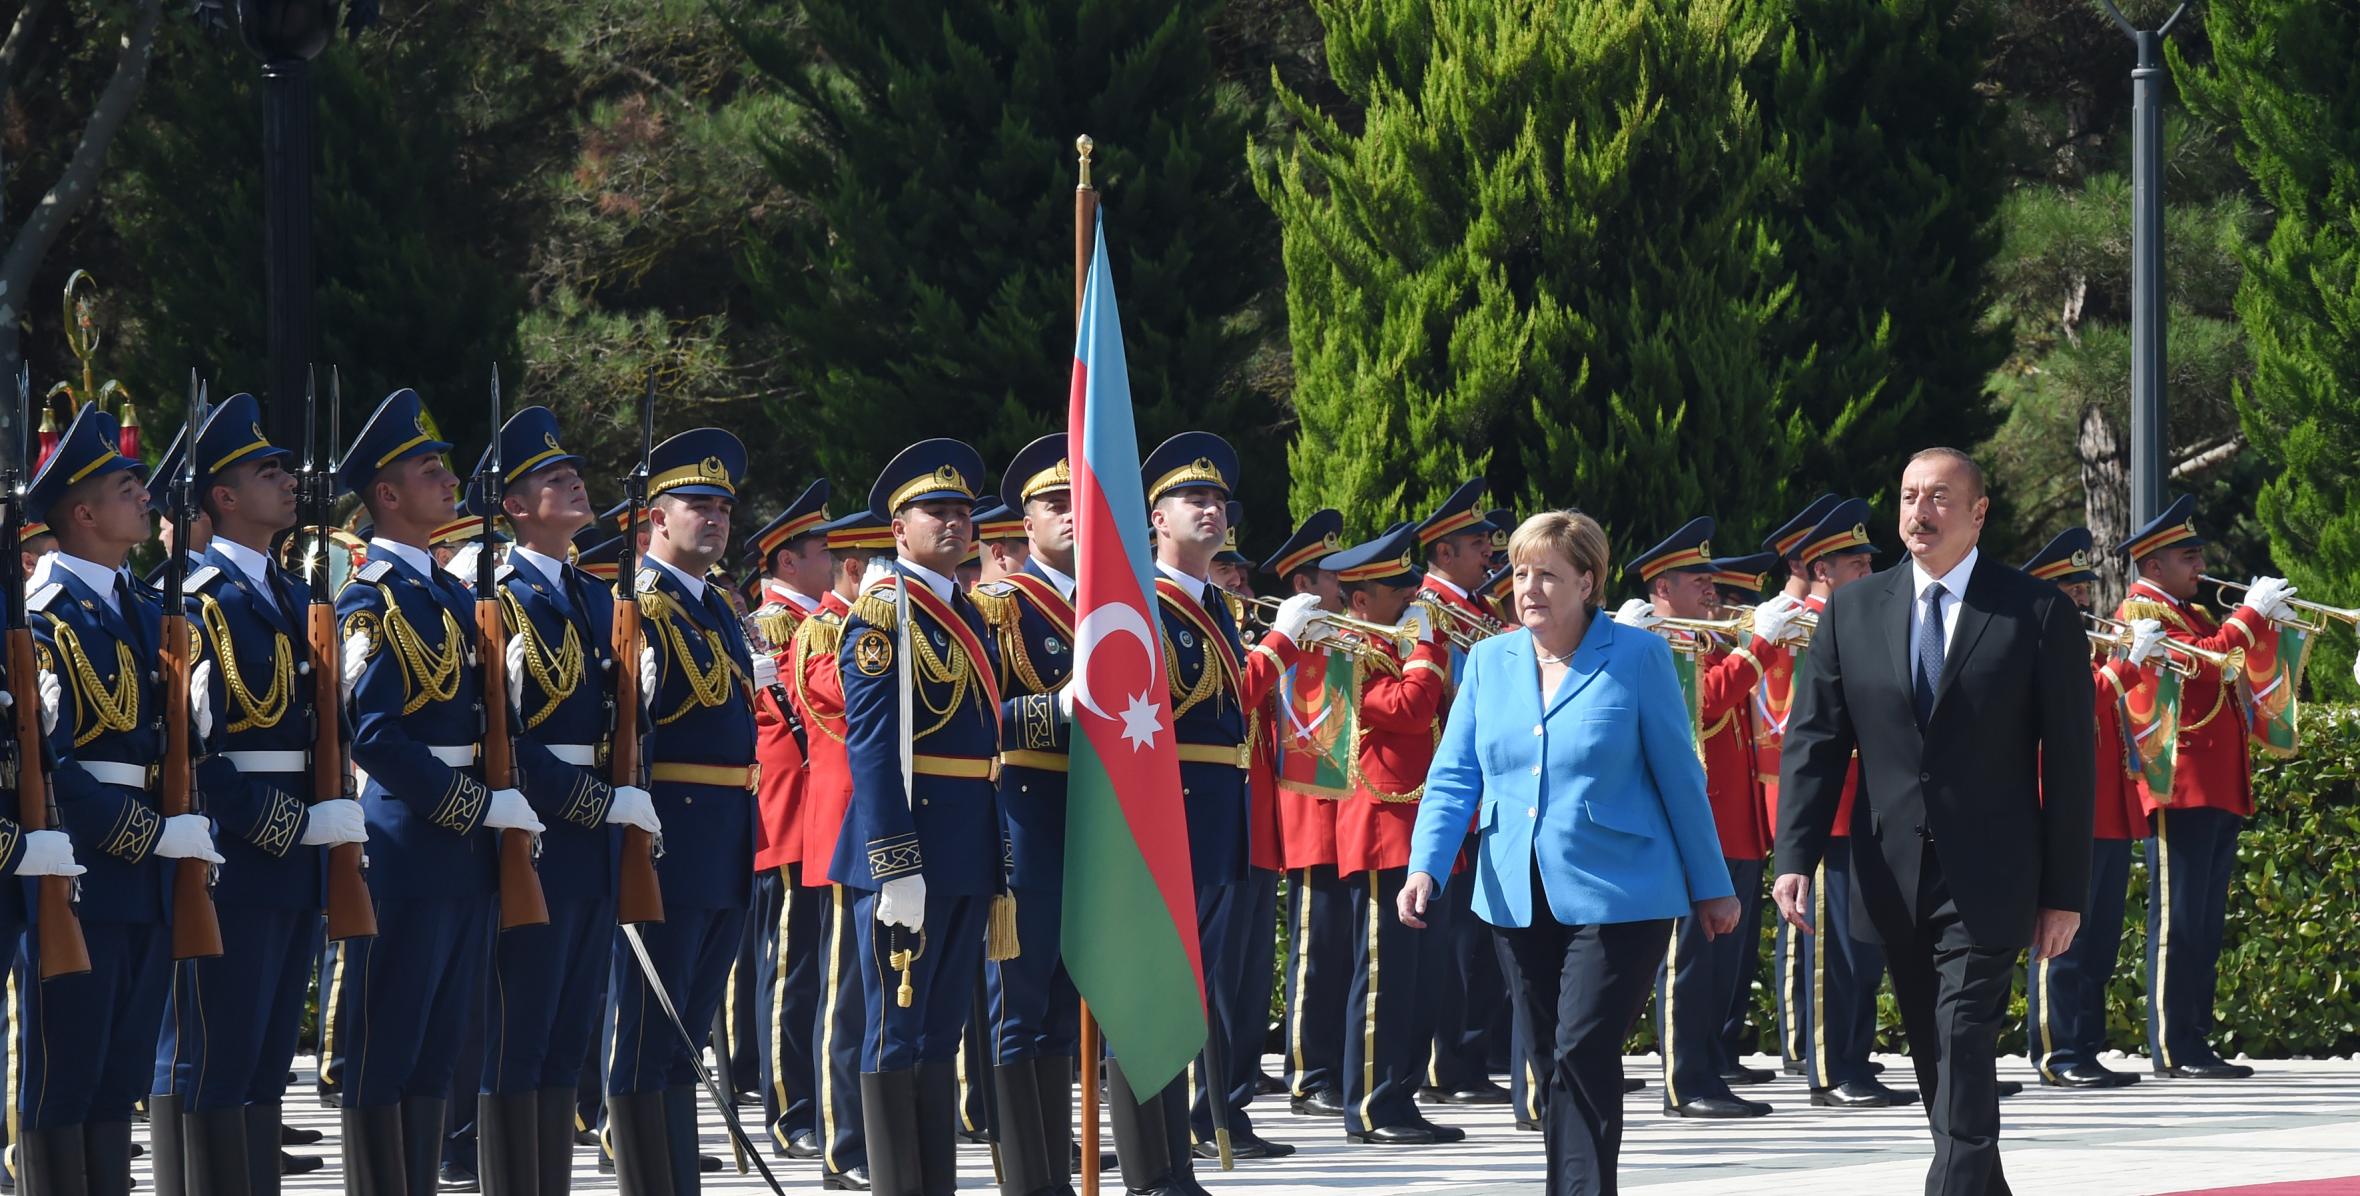 Official welcome ceremony was held for German Federal Chancellor Angela Merkel